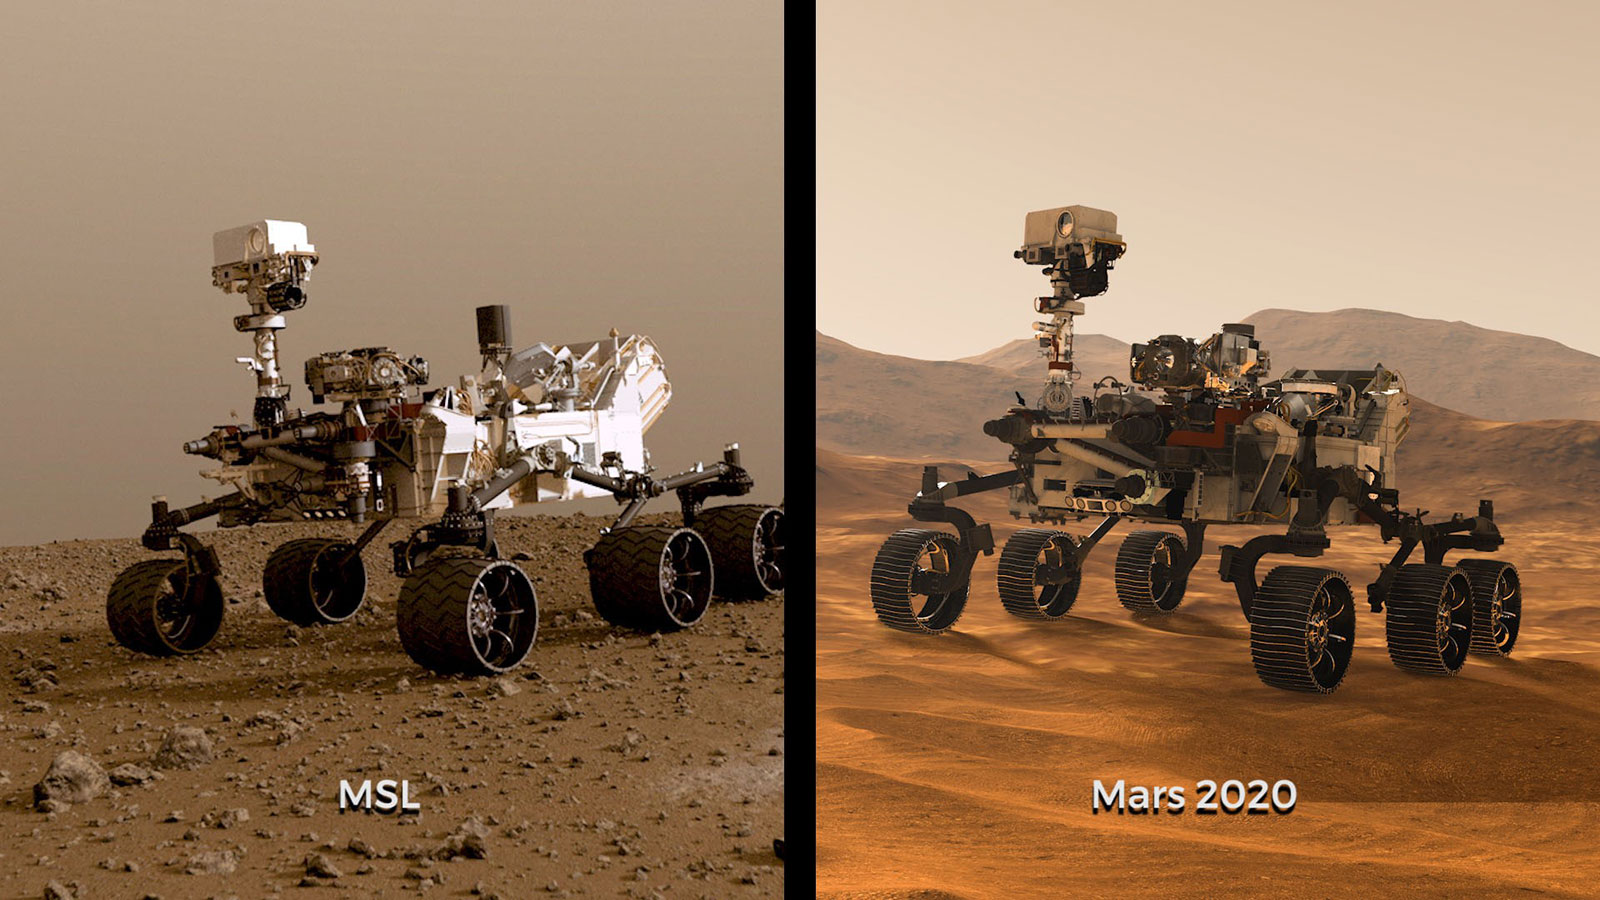 Image showing NASA's Curiosity rover to the left and Mars 2020 rover to the right.